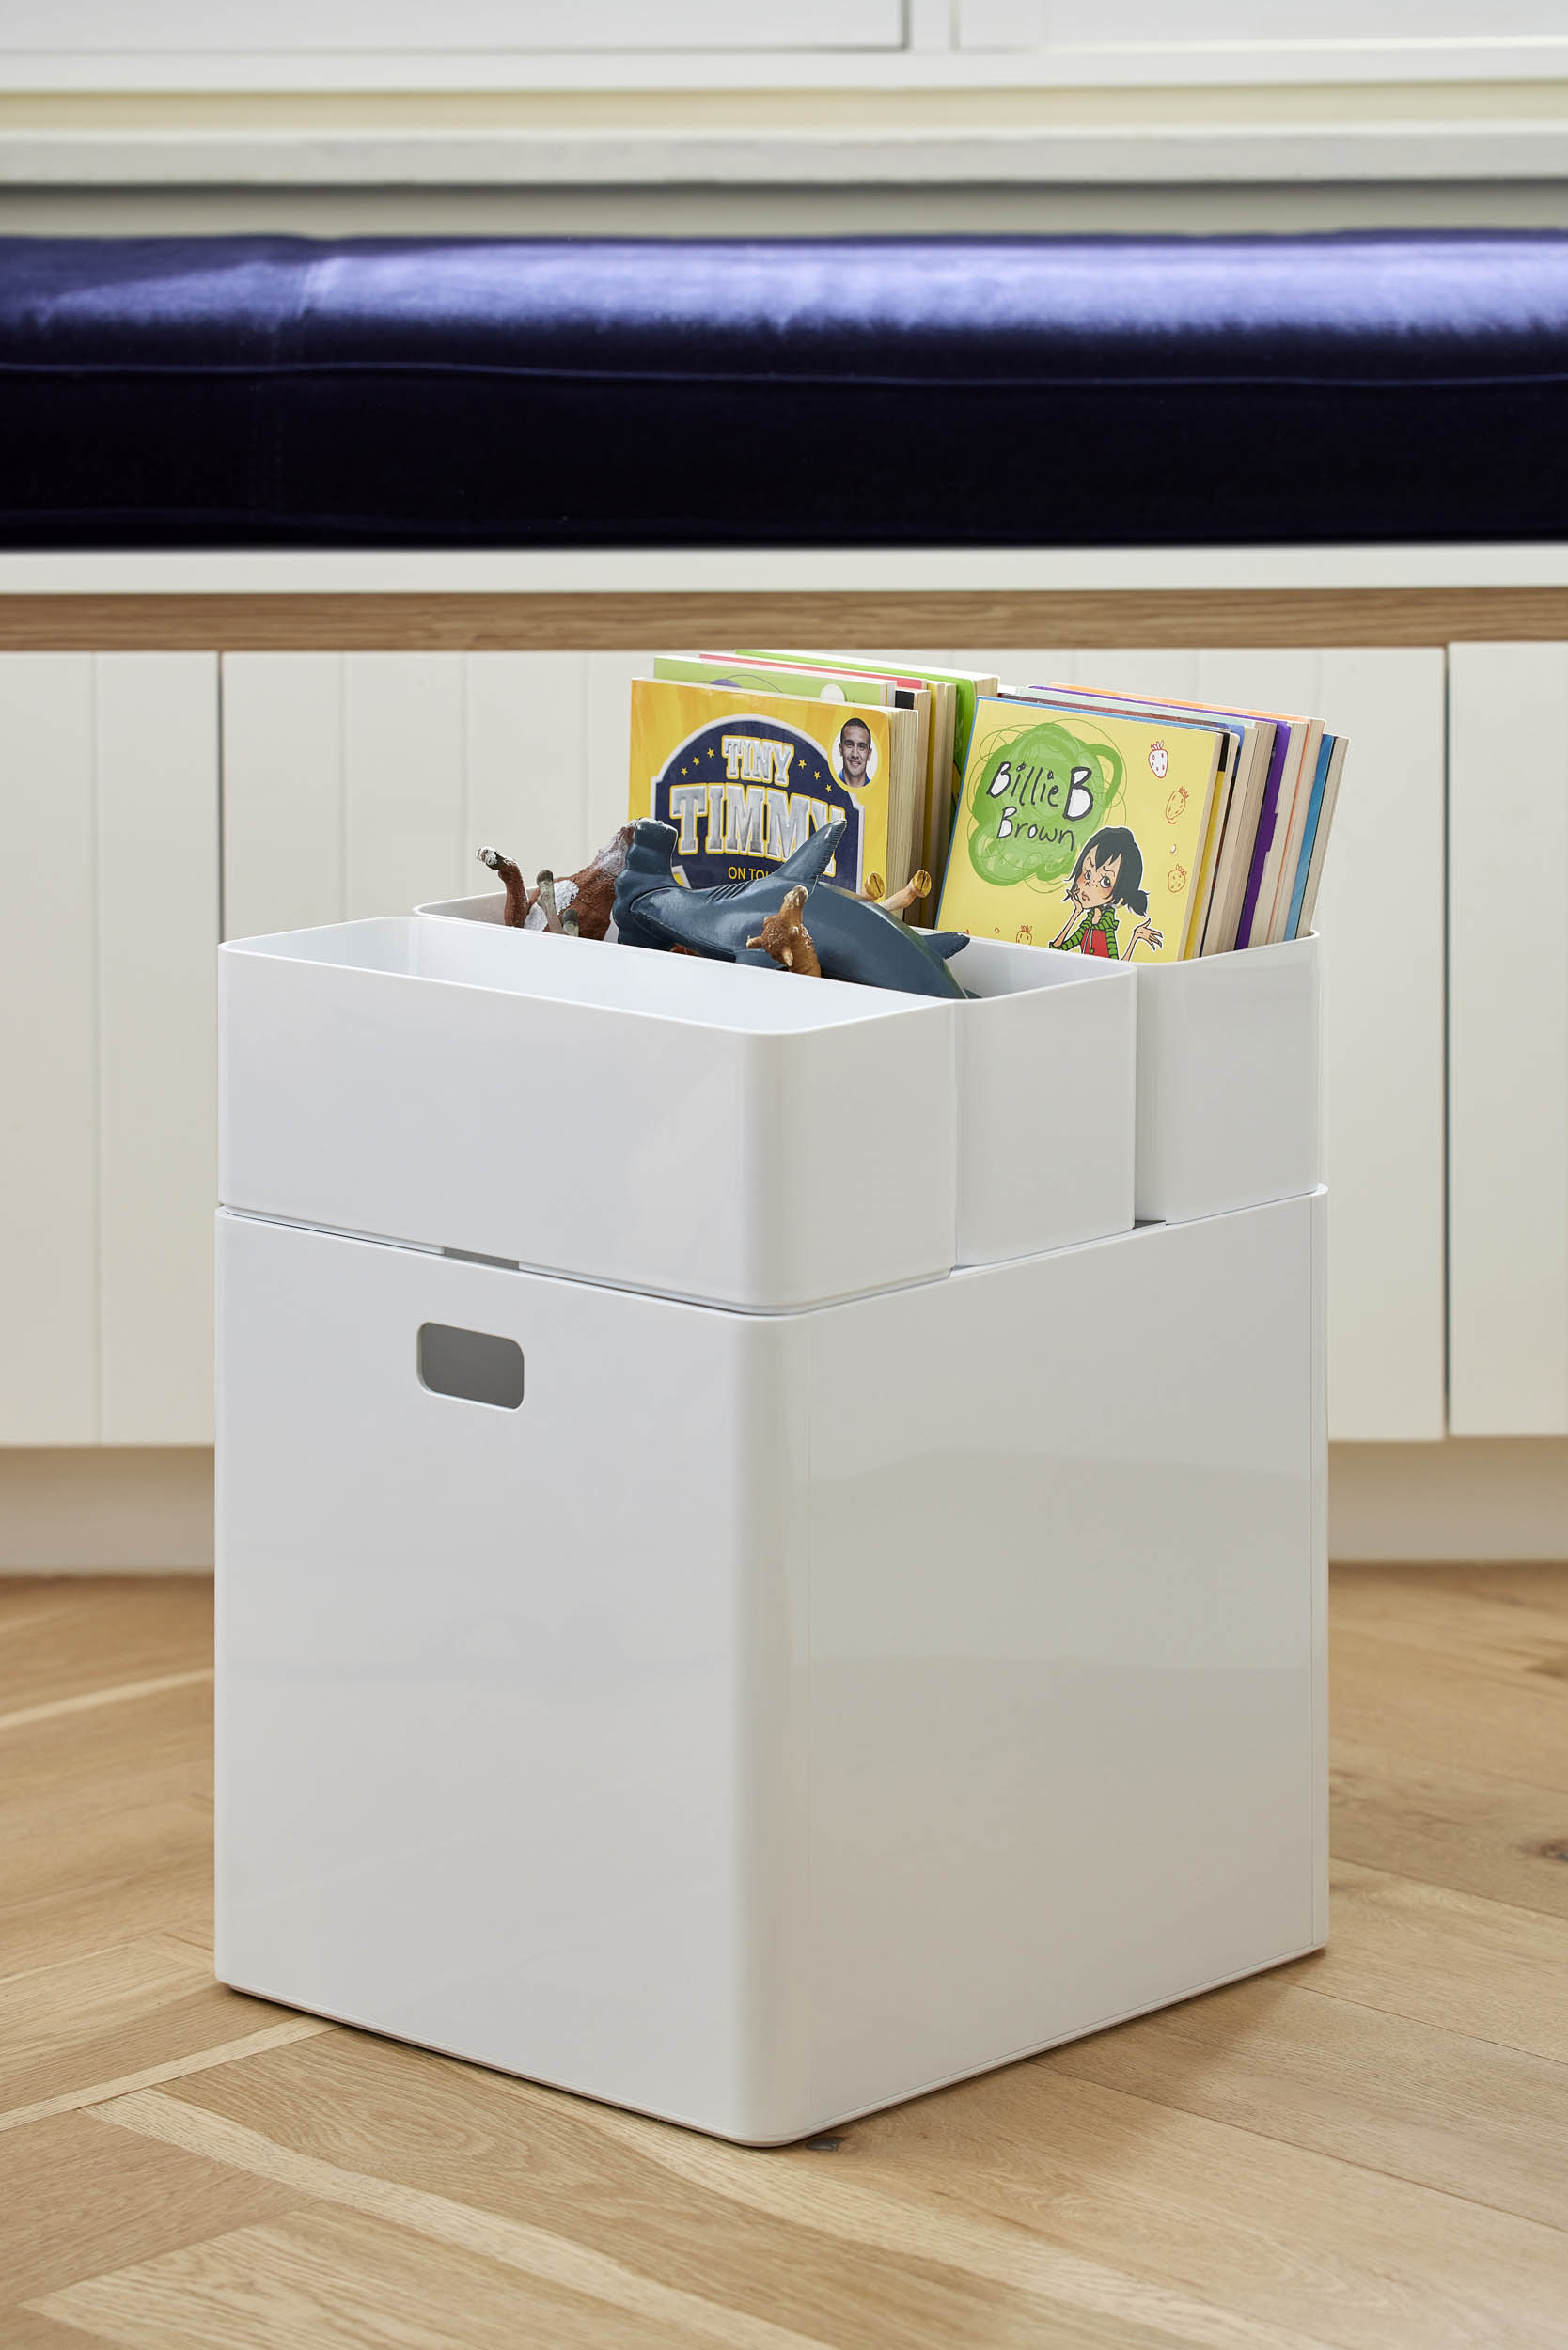 When getting the playroom in order, we recommend using a 27L stackable cube for storing larger toys. On top of the large cube, stack a mix of other sizes for smaller items, such as books, figurines and Lego.